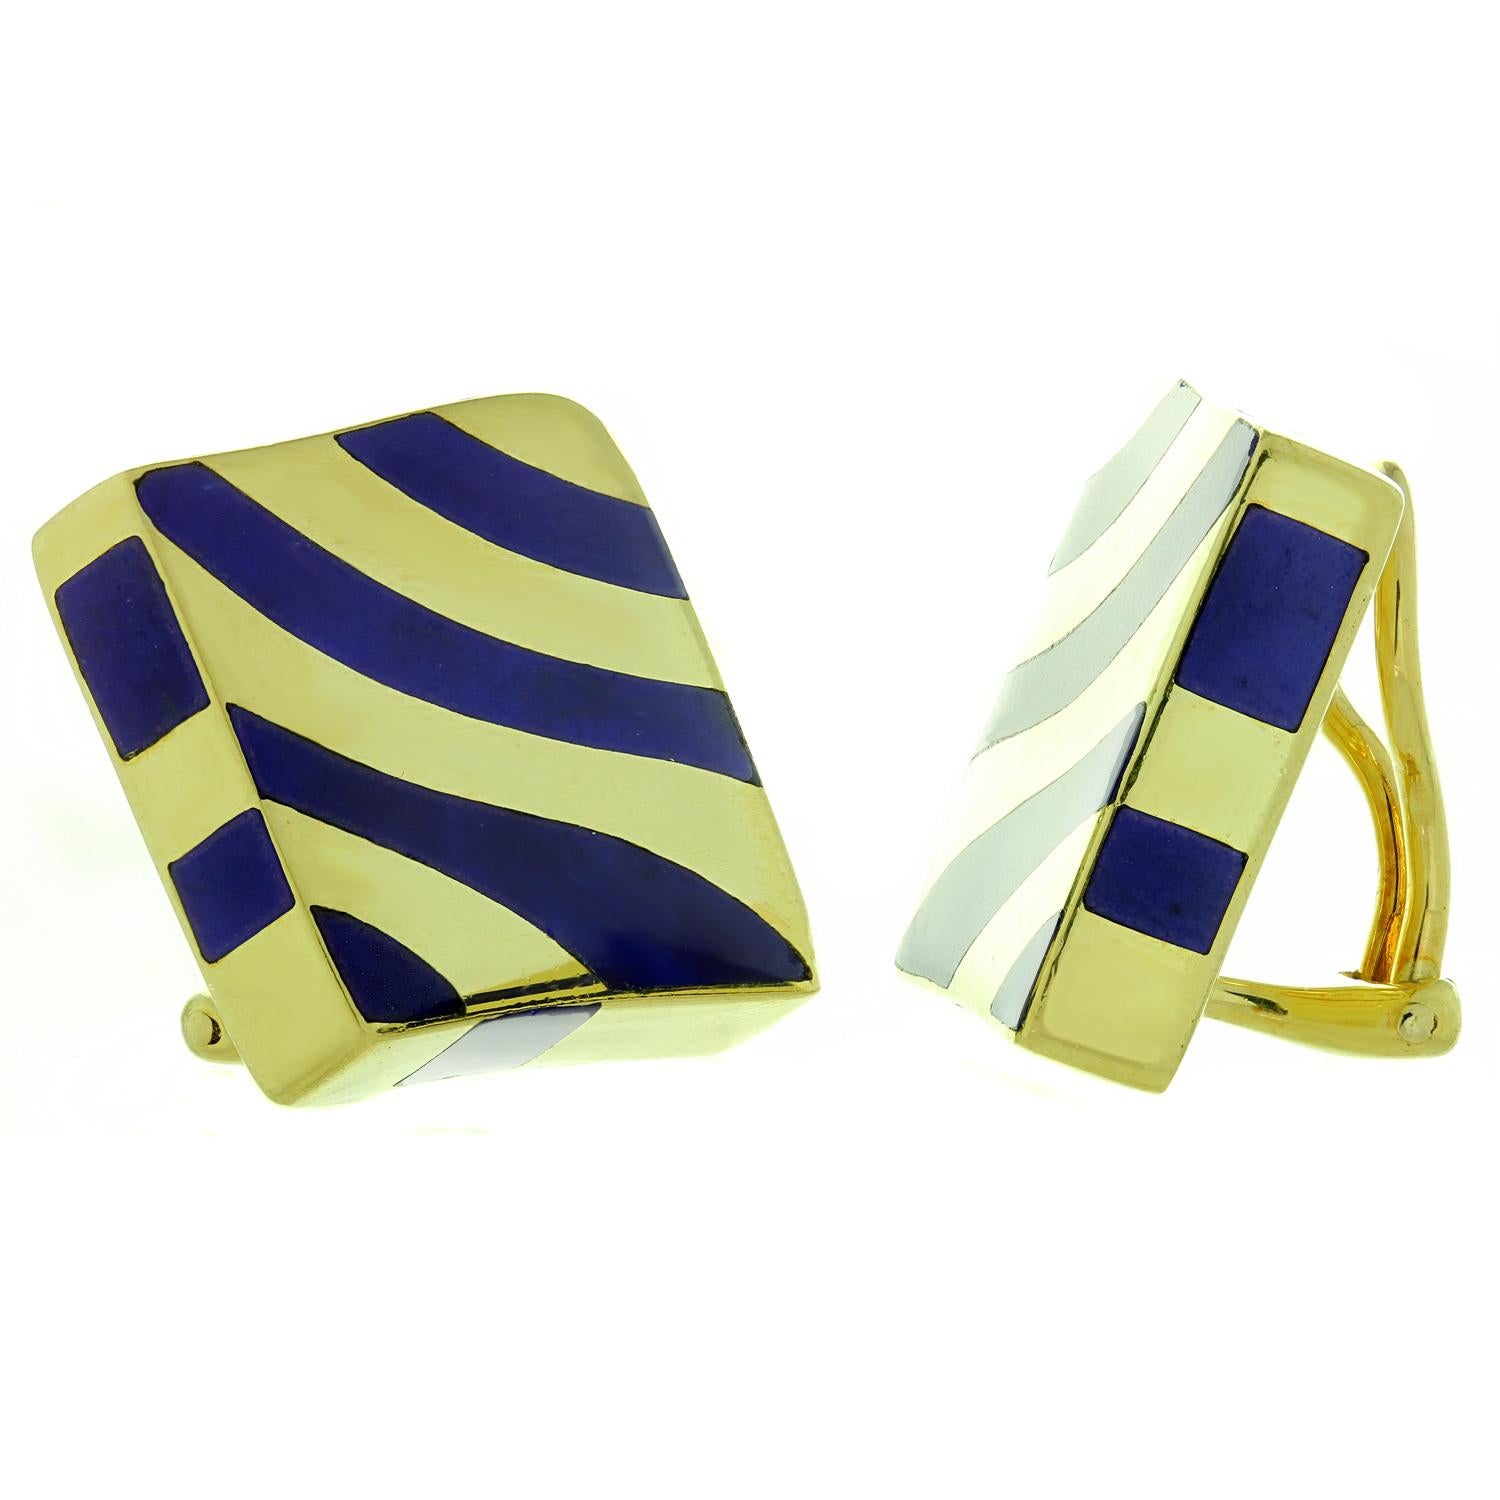 These rare Angela Cummings clip-on earrings earrings are crafted in 18k yellow gold and feature chic blue lapis lazuli stripes. Made in United States circa 1990s. Measurements: 0.78